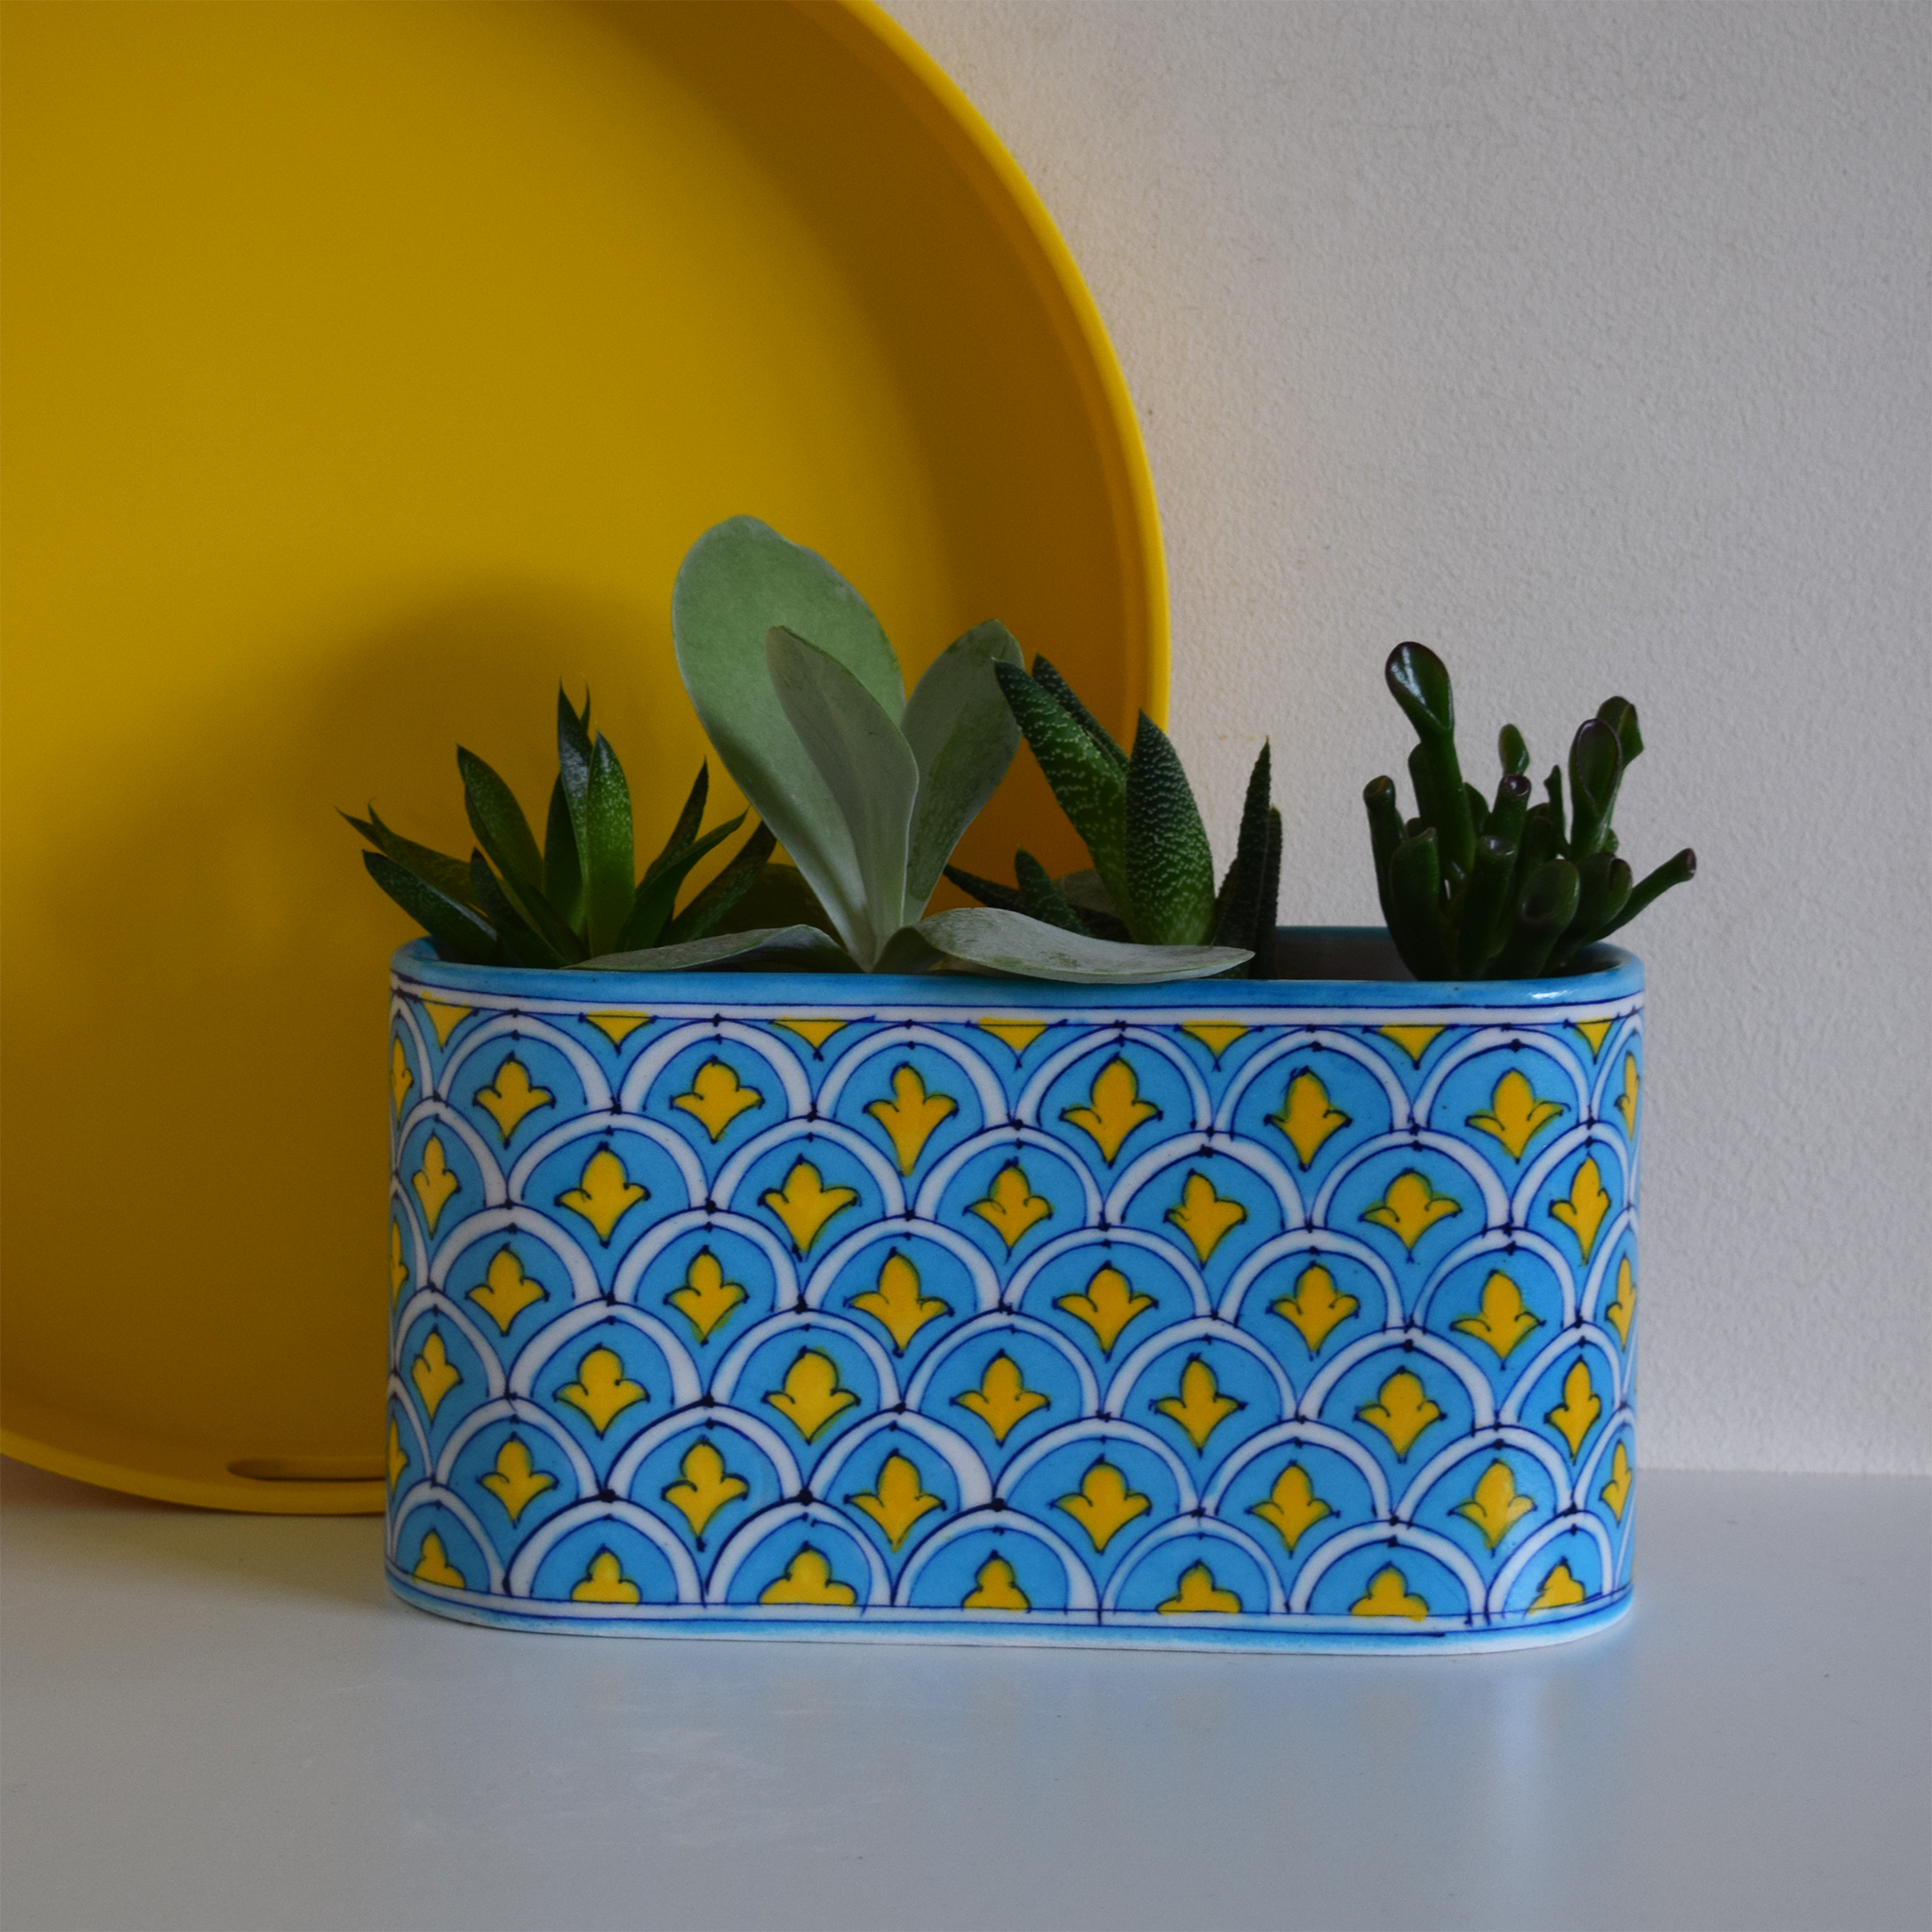 Turquoise and Yellow Patterned Planter